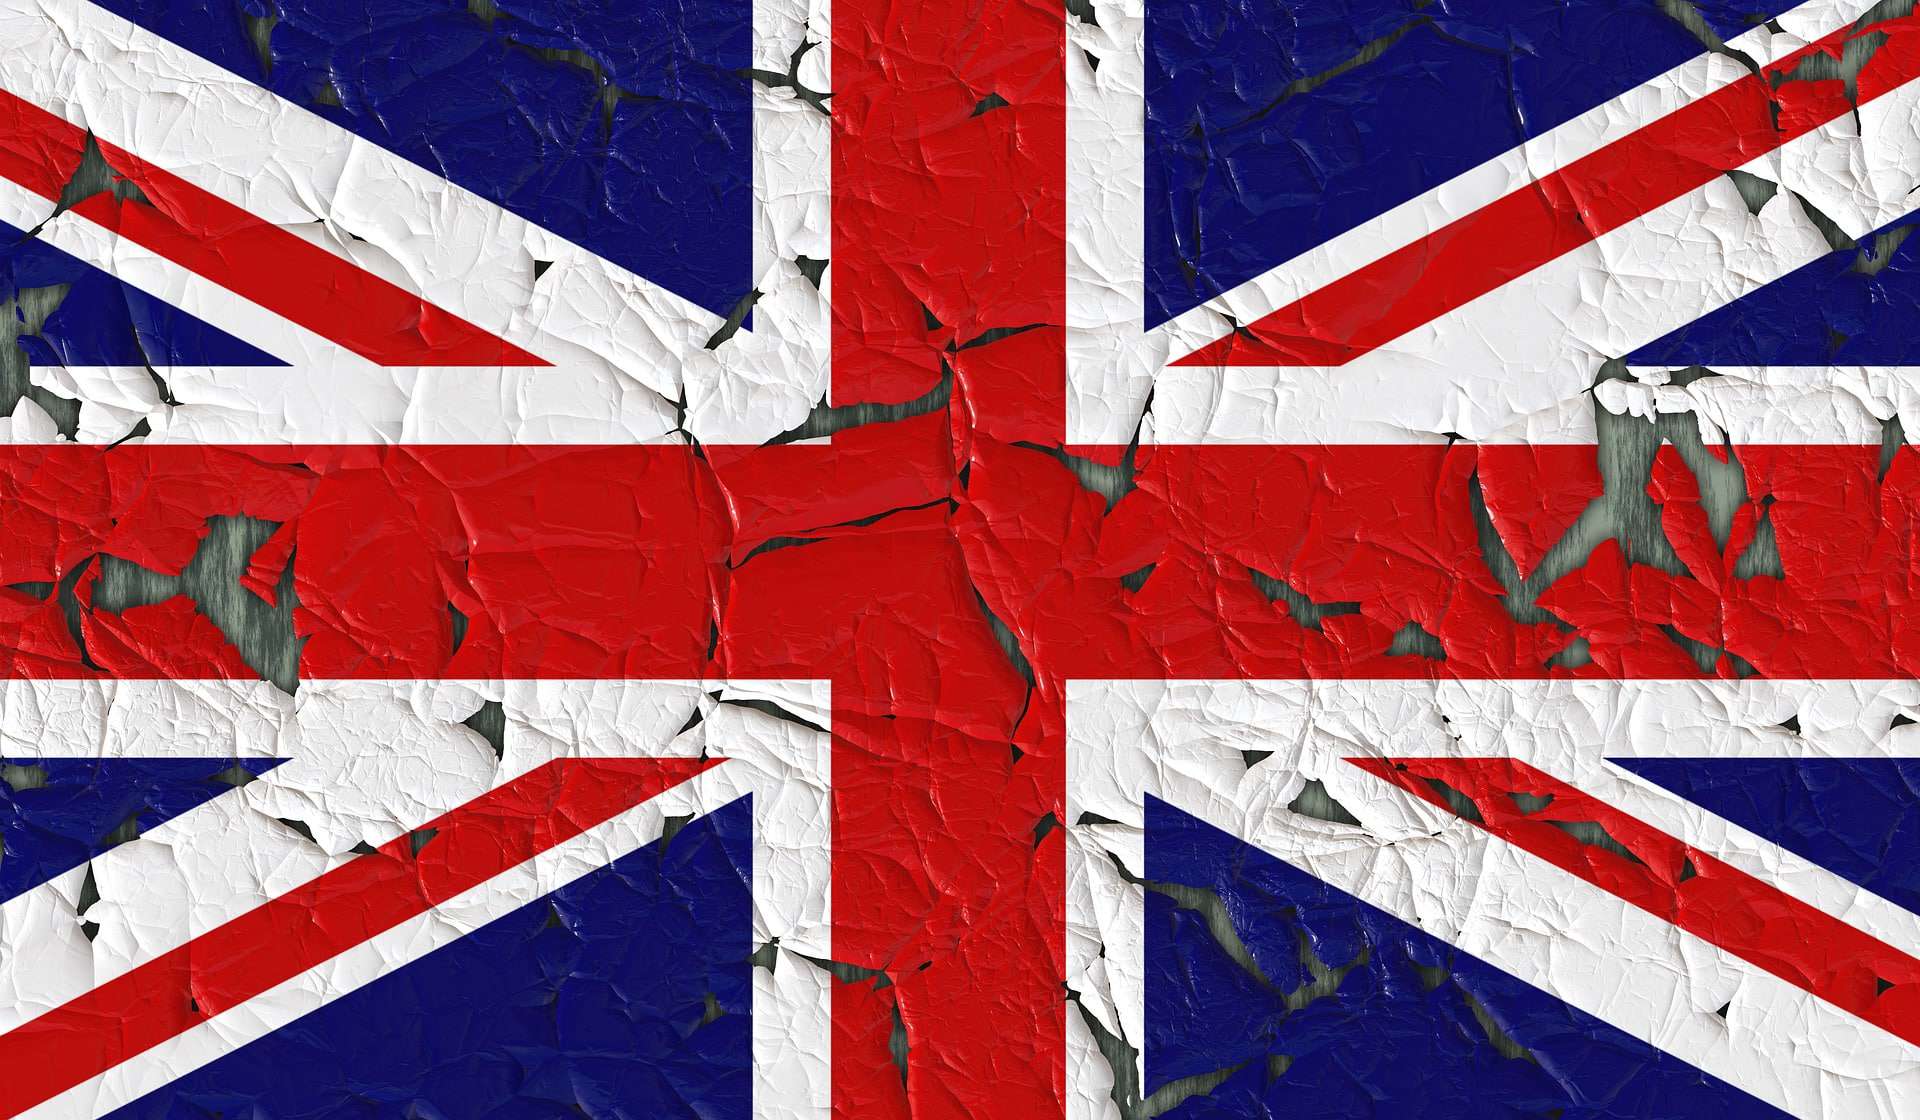 The UK's flag is depicted on a worn surface.